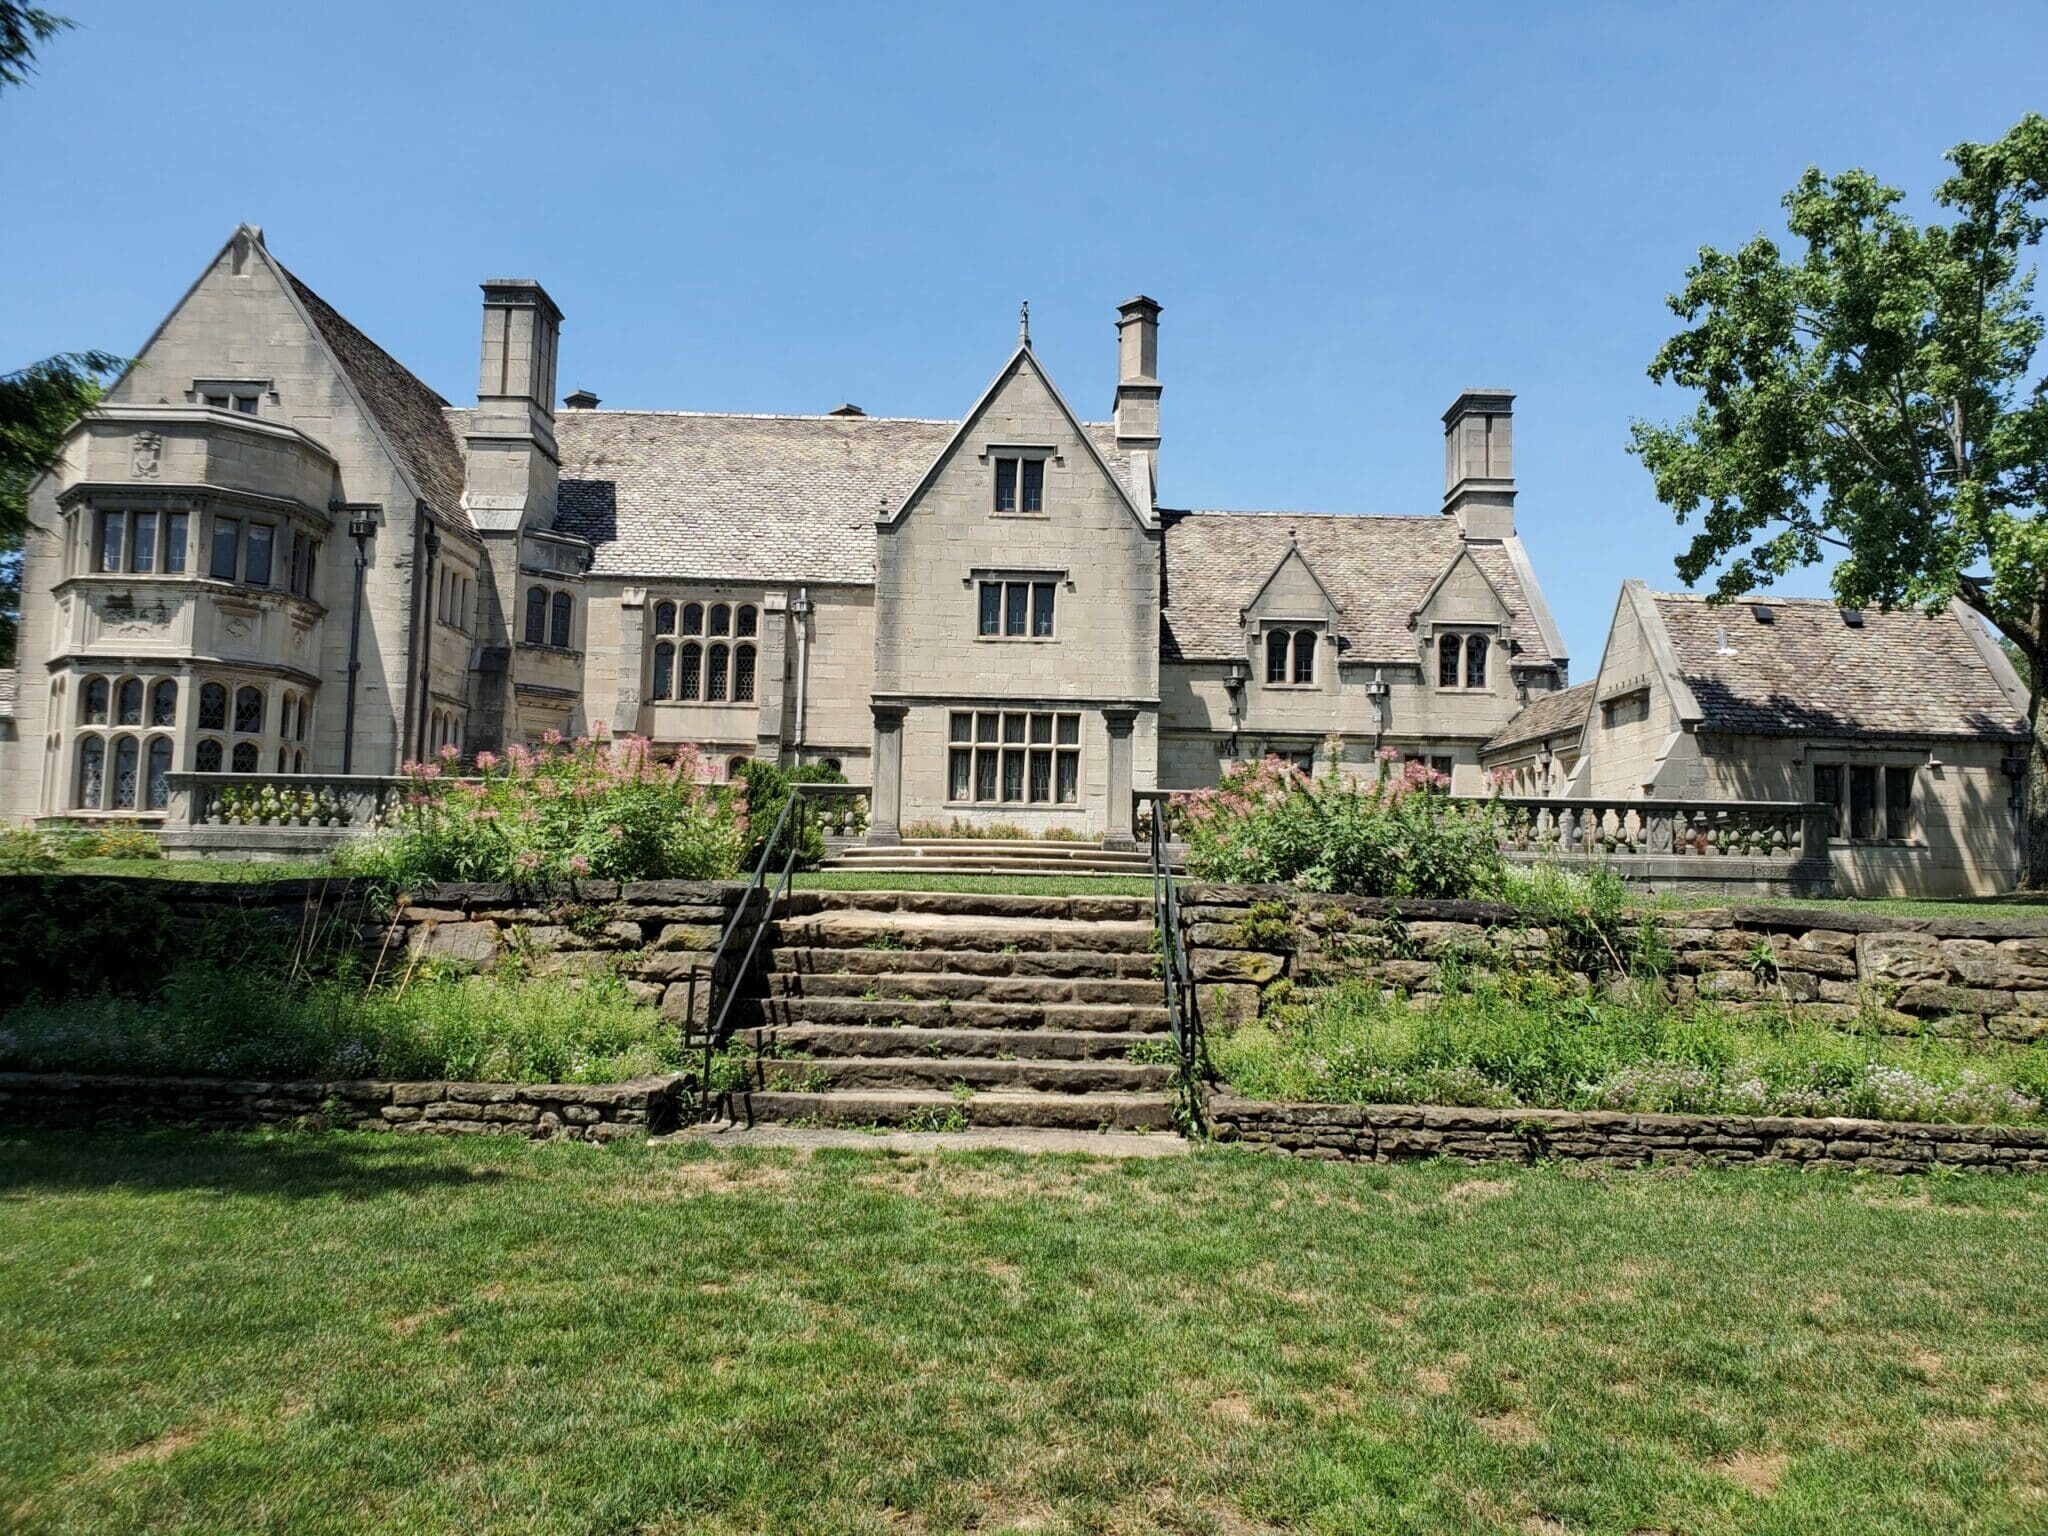 The Hartwood Acres